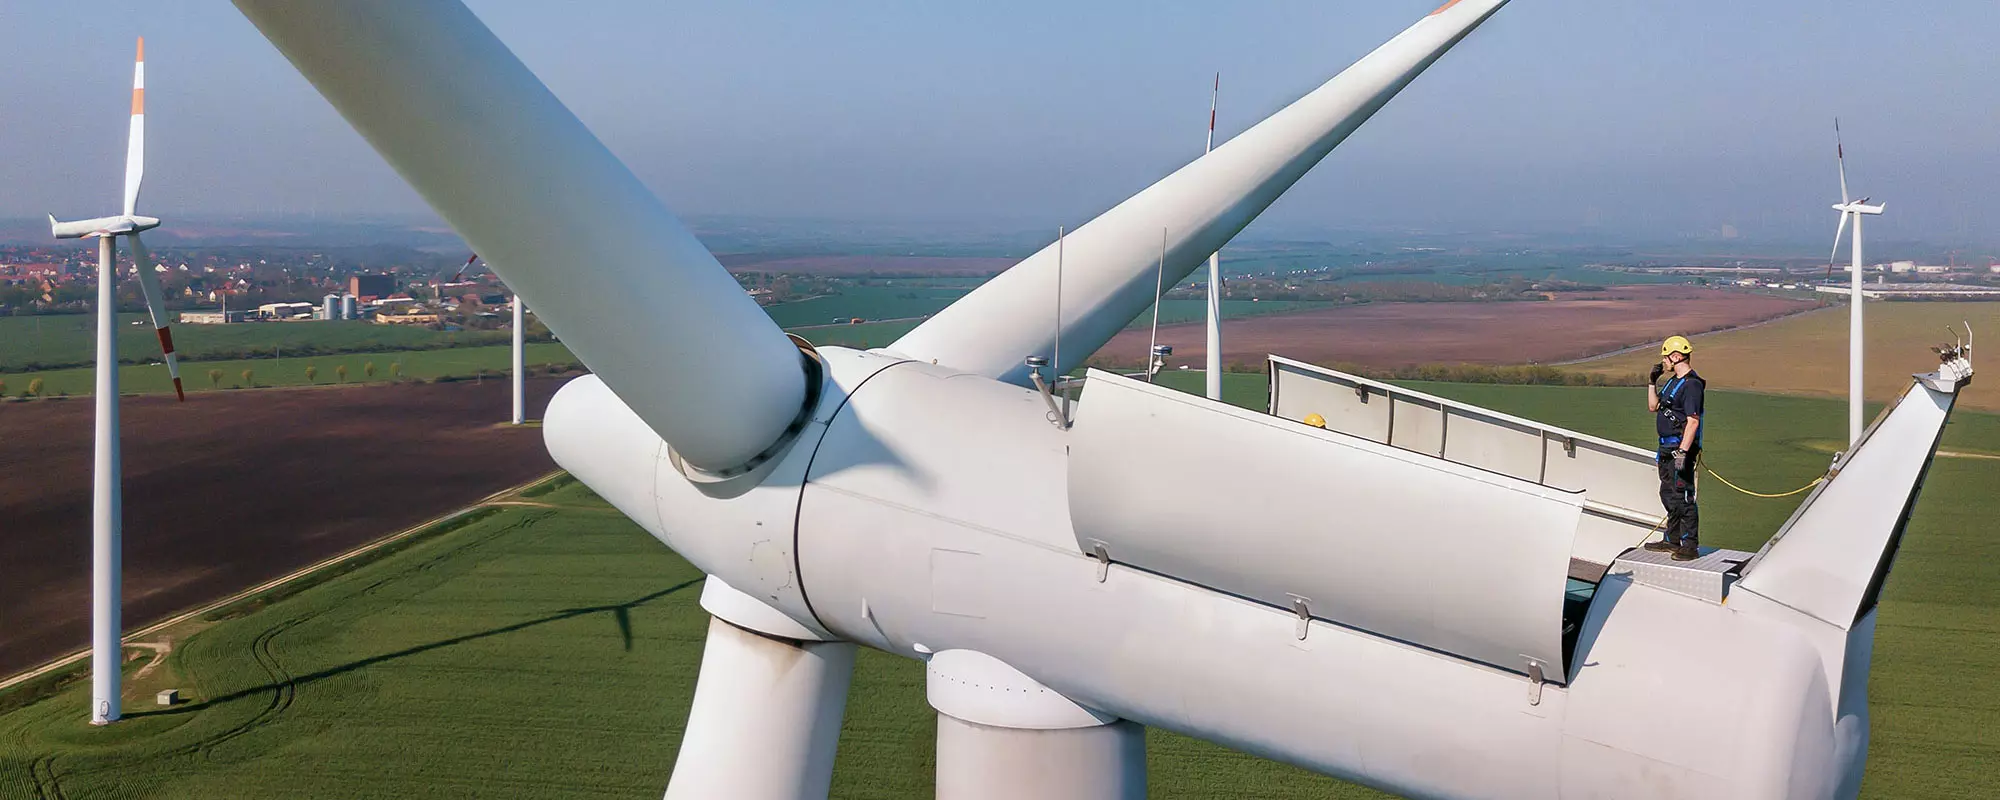 onshore projects in wind energy